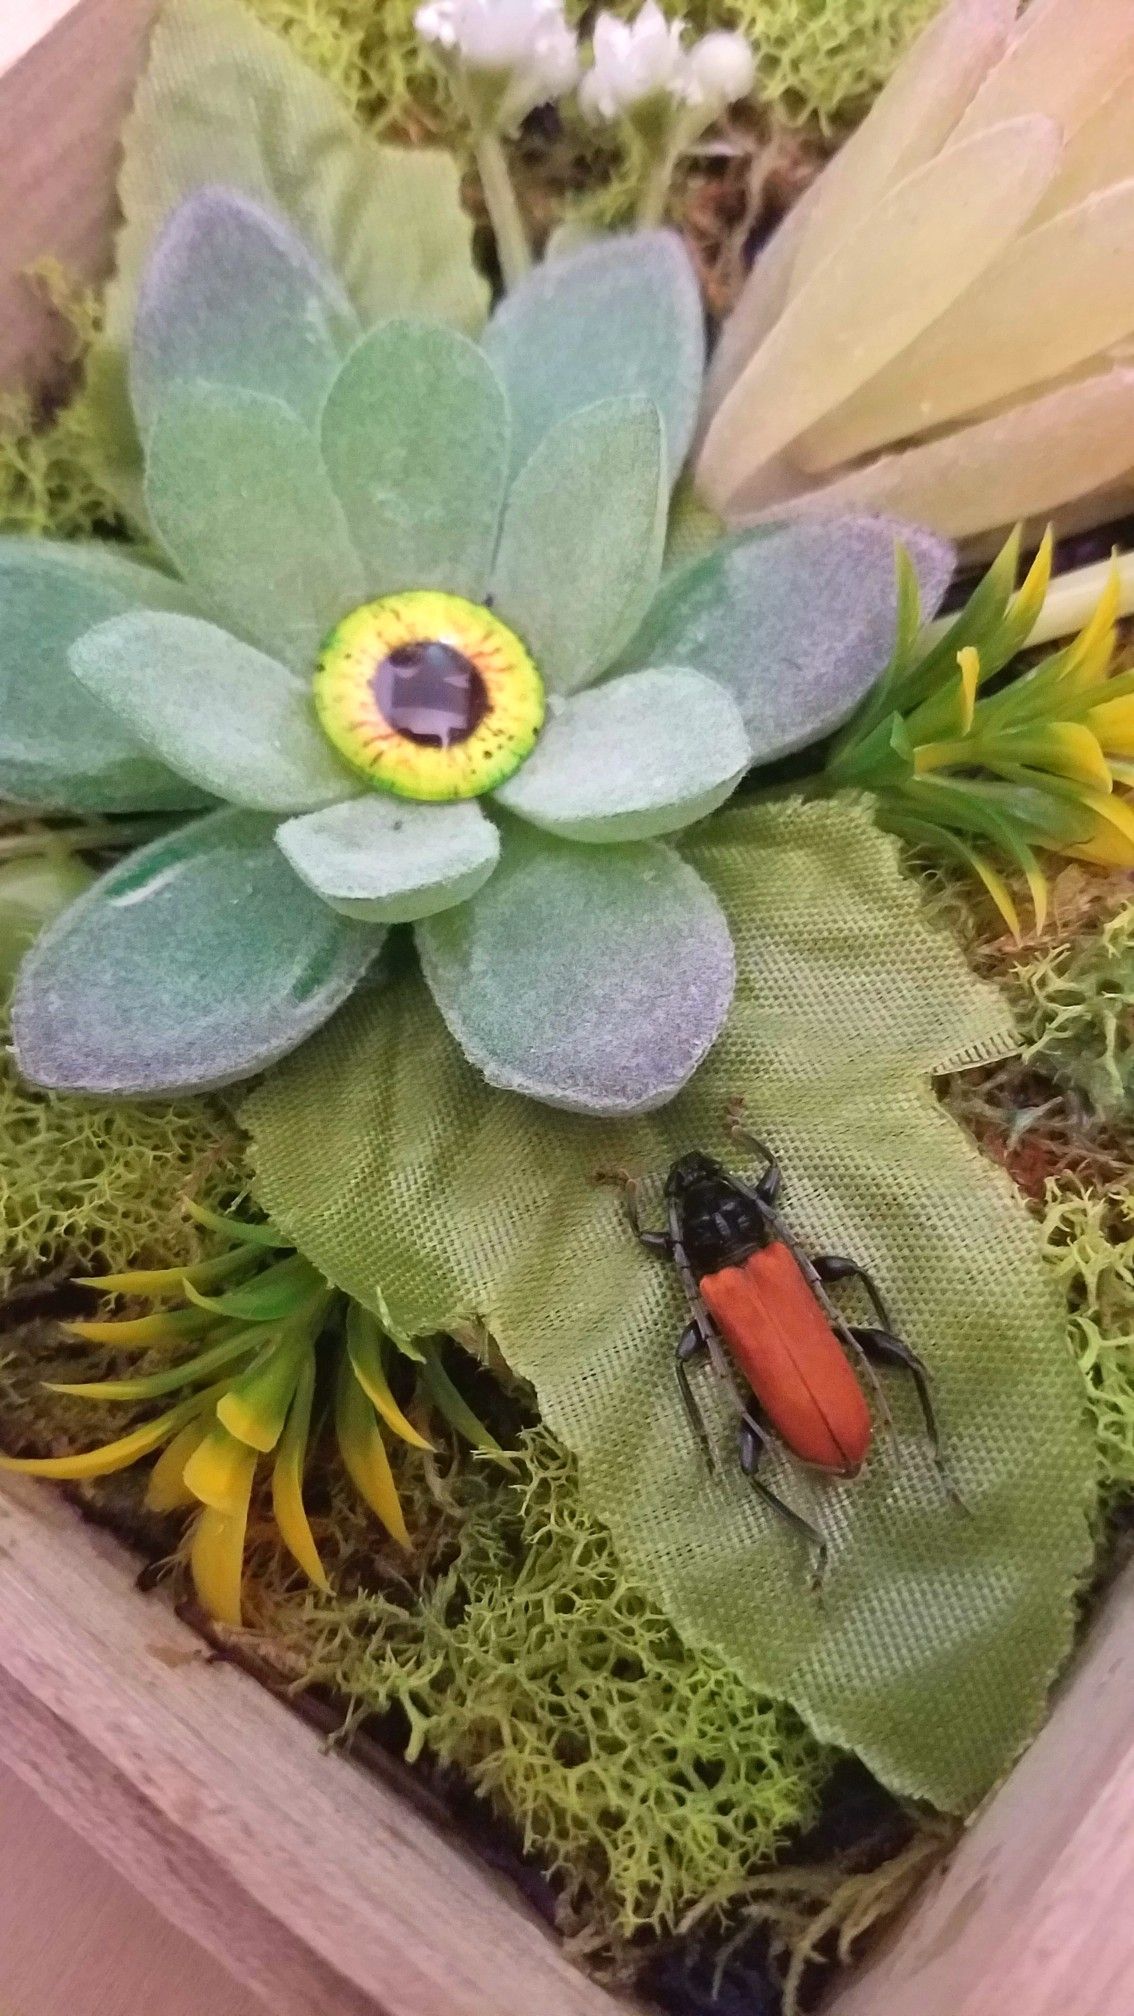 Succulent Eyeball Oddity Display with Longhorn Beetle 6, art by Sherrie Thai of Shaireproductions.com